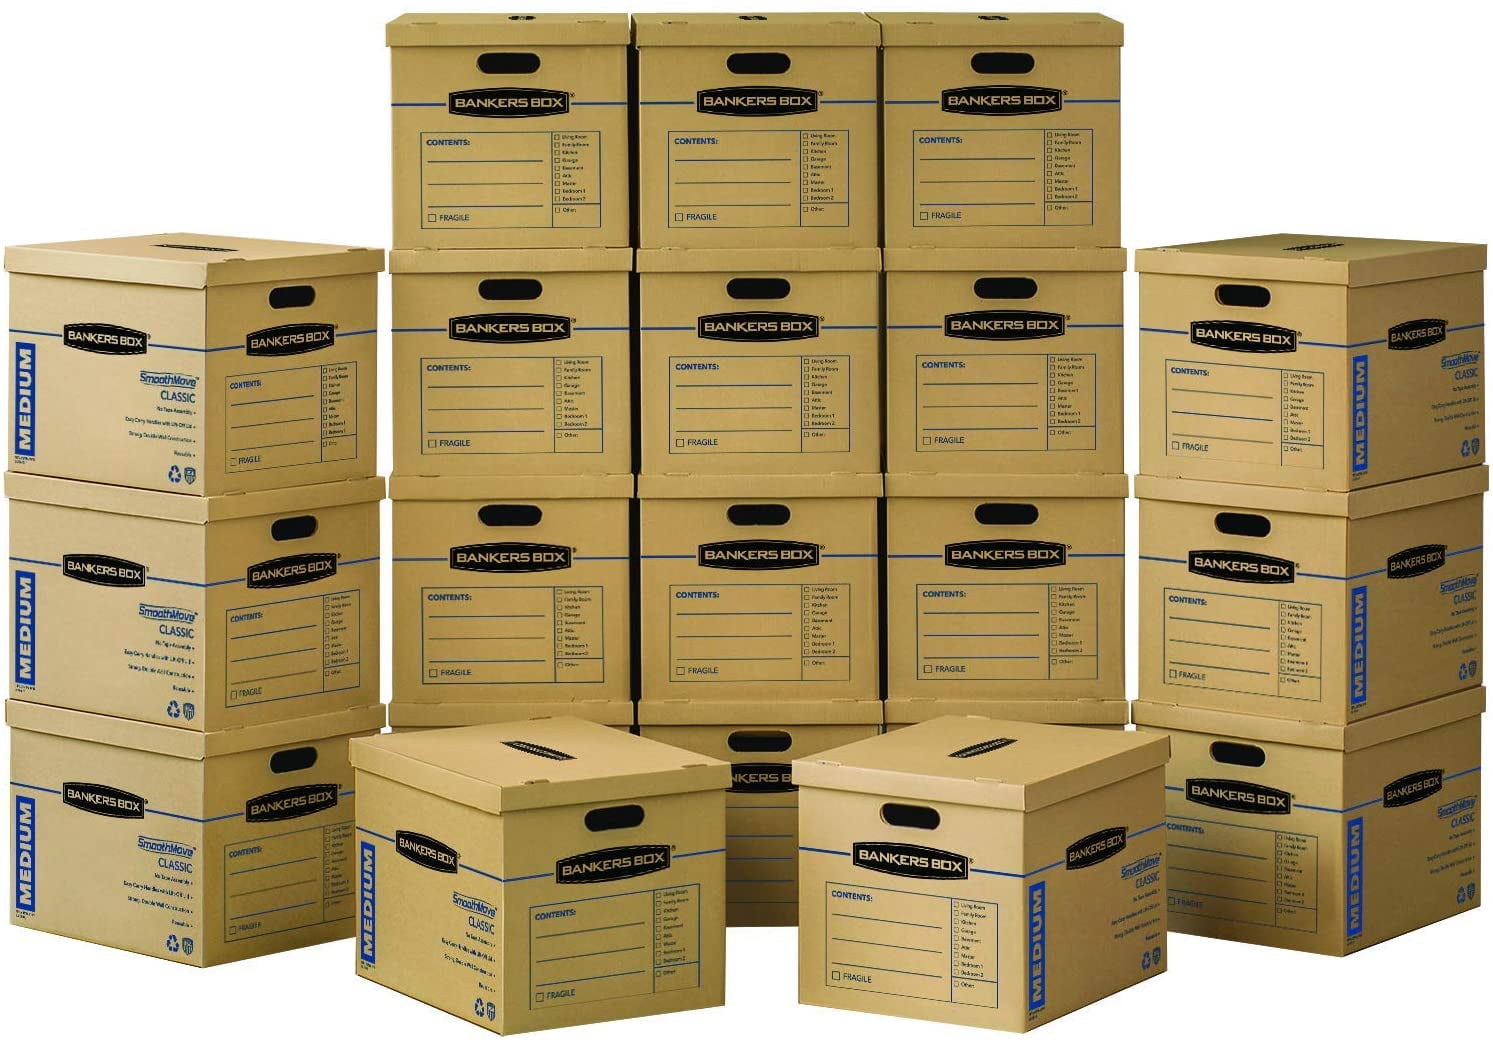 Bankers Box SmoothMove Classic Moving Boxes Tape-Free Assembly Easy Carry Handles 7714902 Small 15 x 12 x 10 Inches 5 Pack